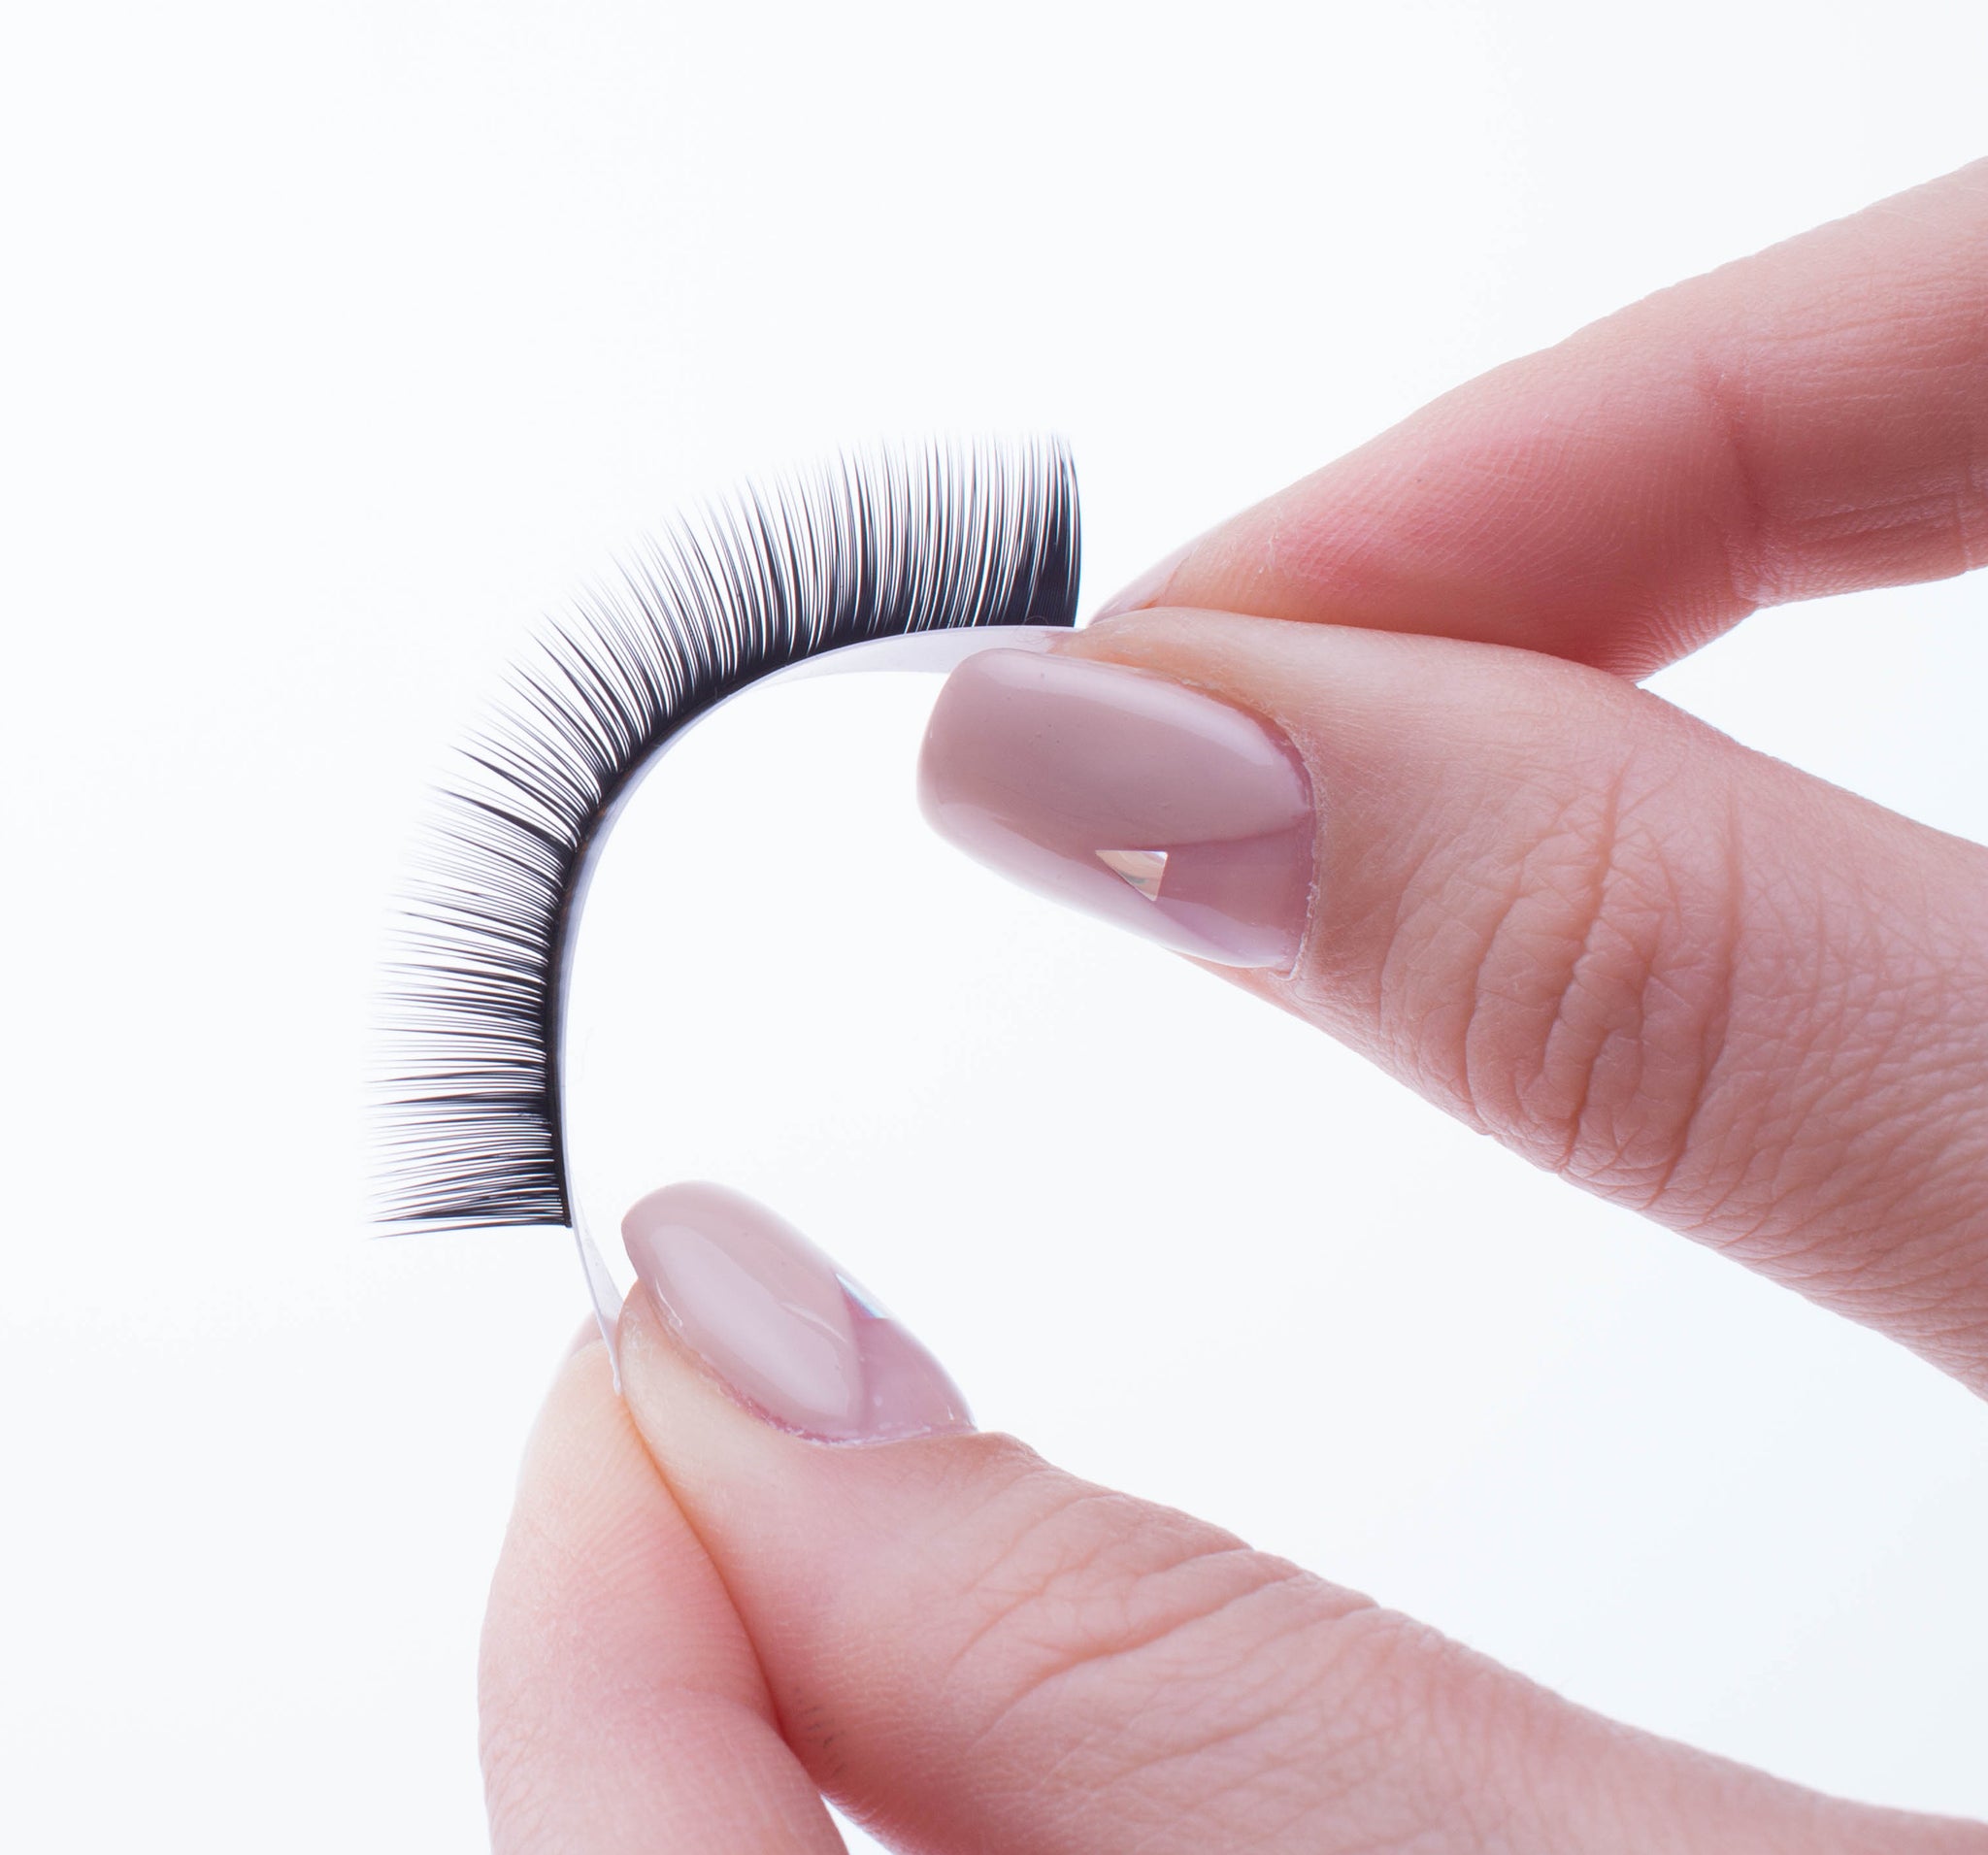 What are mink lashes? Is mink lash from the animal mink?